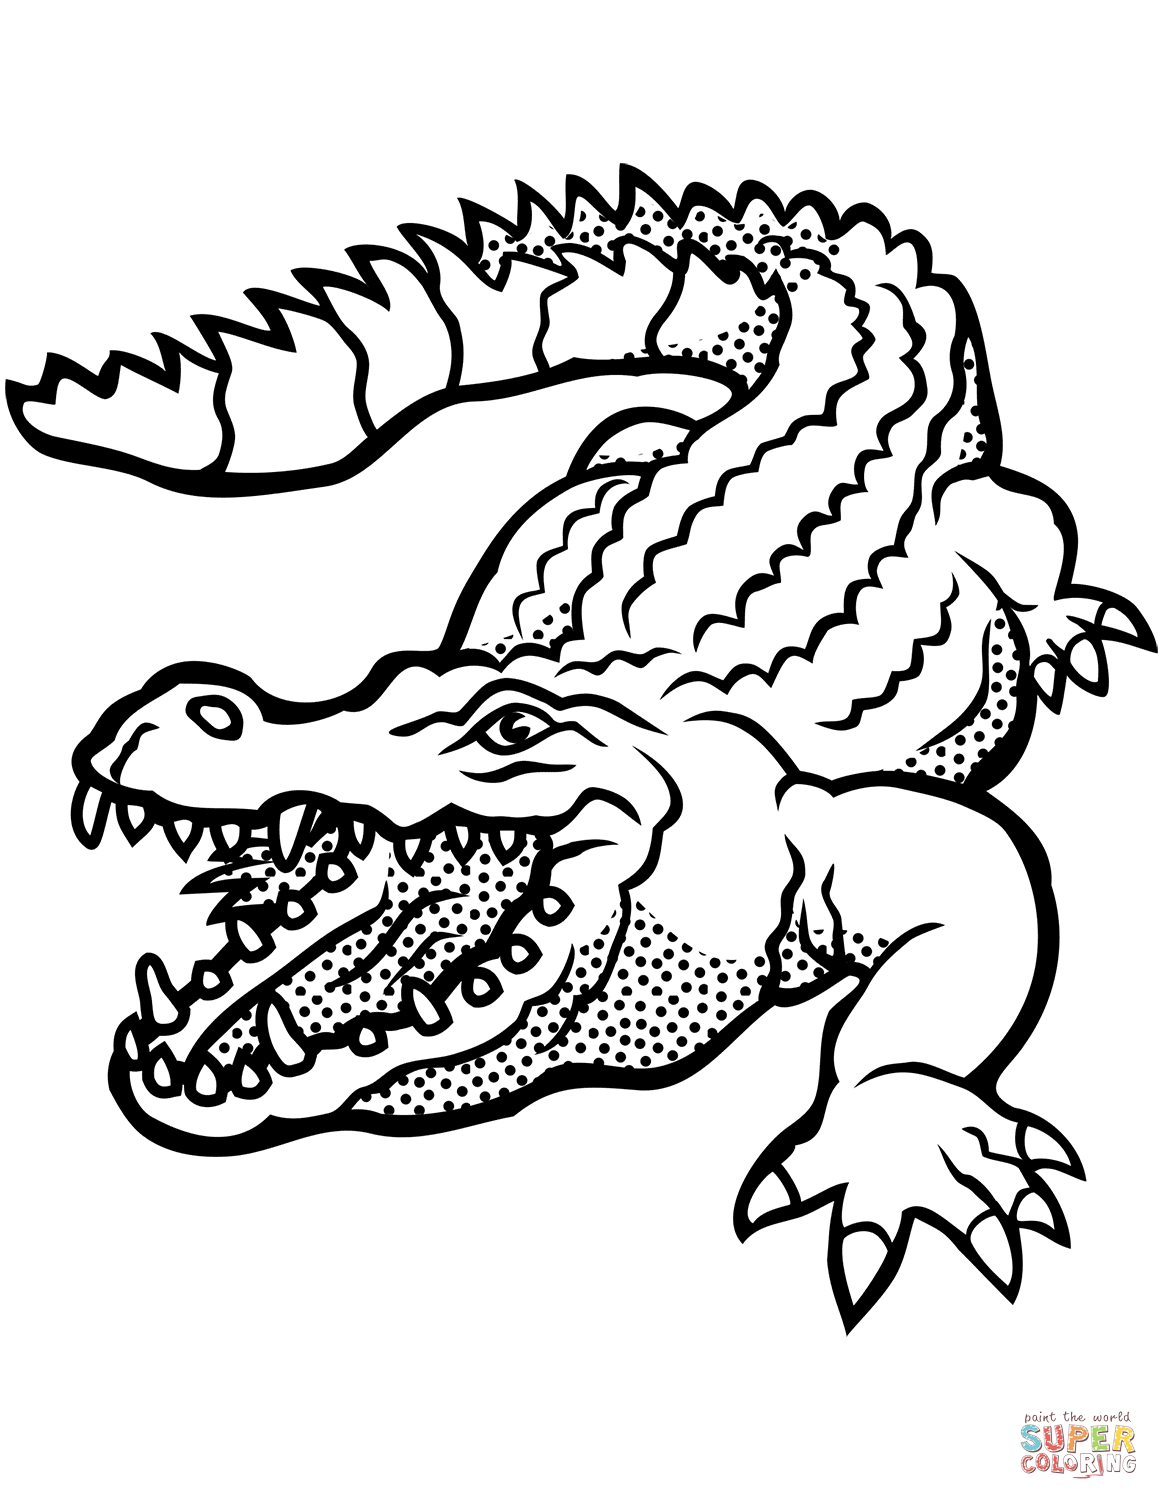 Crocodile With Open Mouth Coloring Page  Free Printable destiné Coloriage Crocodile